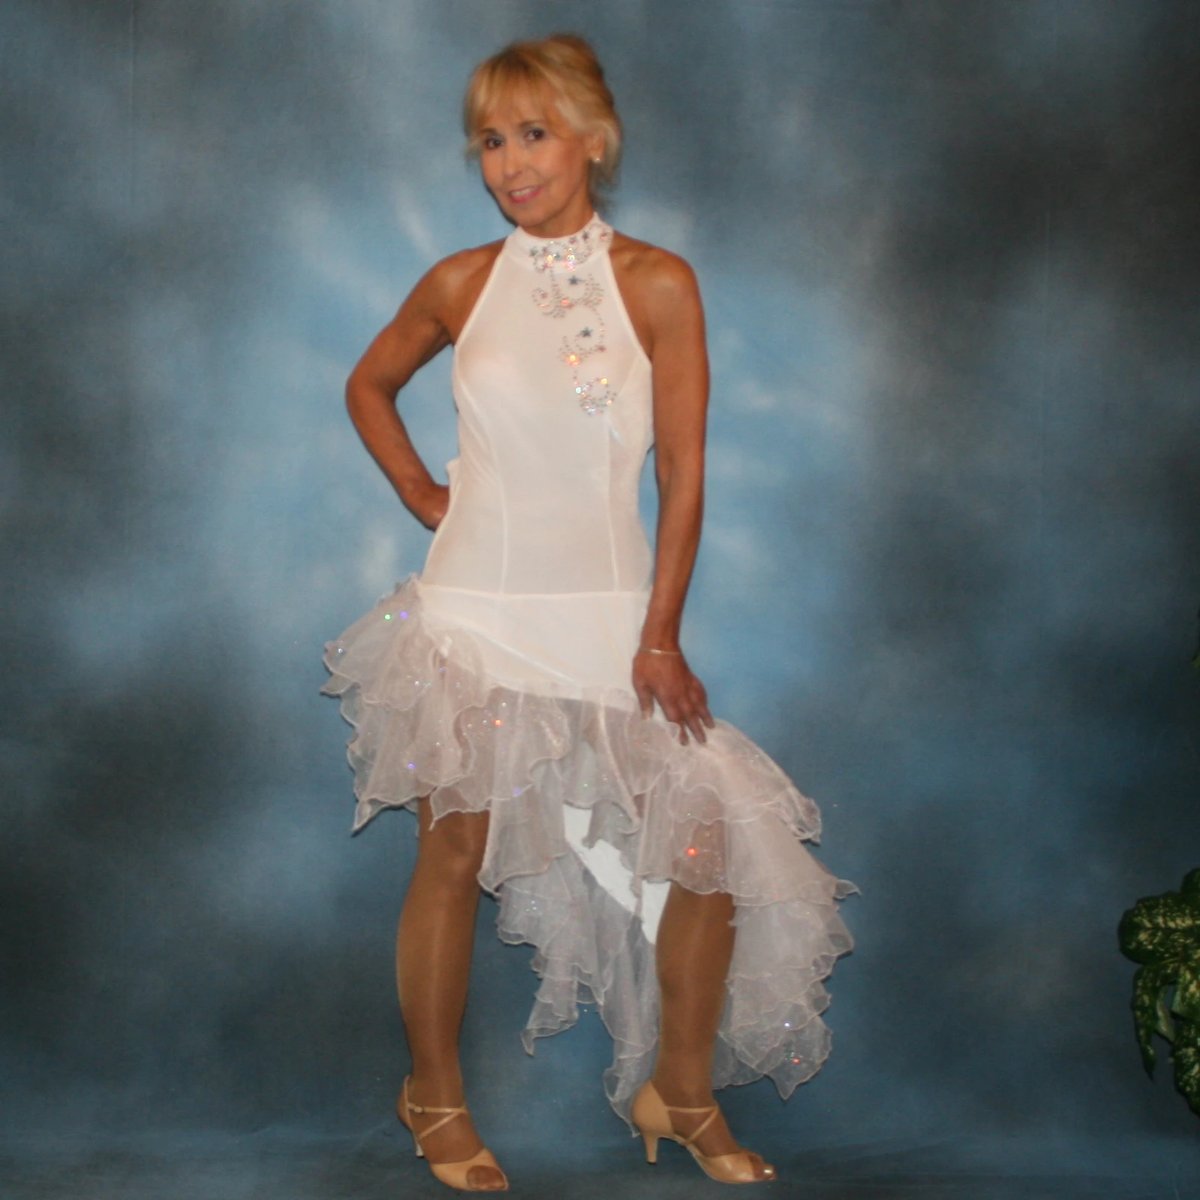 Crystal's Creations White Latin/rhythm dress created in luxurious stretch velvet, features fancy organza flounces with delicate pink & blue bubble pearlized flocking, embellished with Swarovski rhinestone work, plus hand beading.